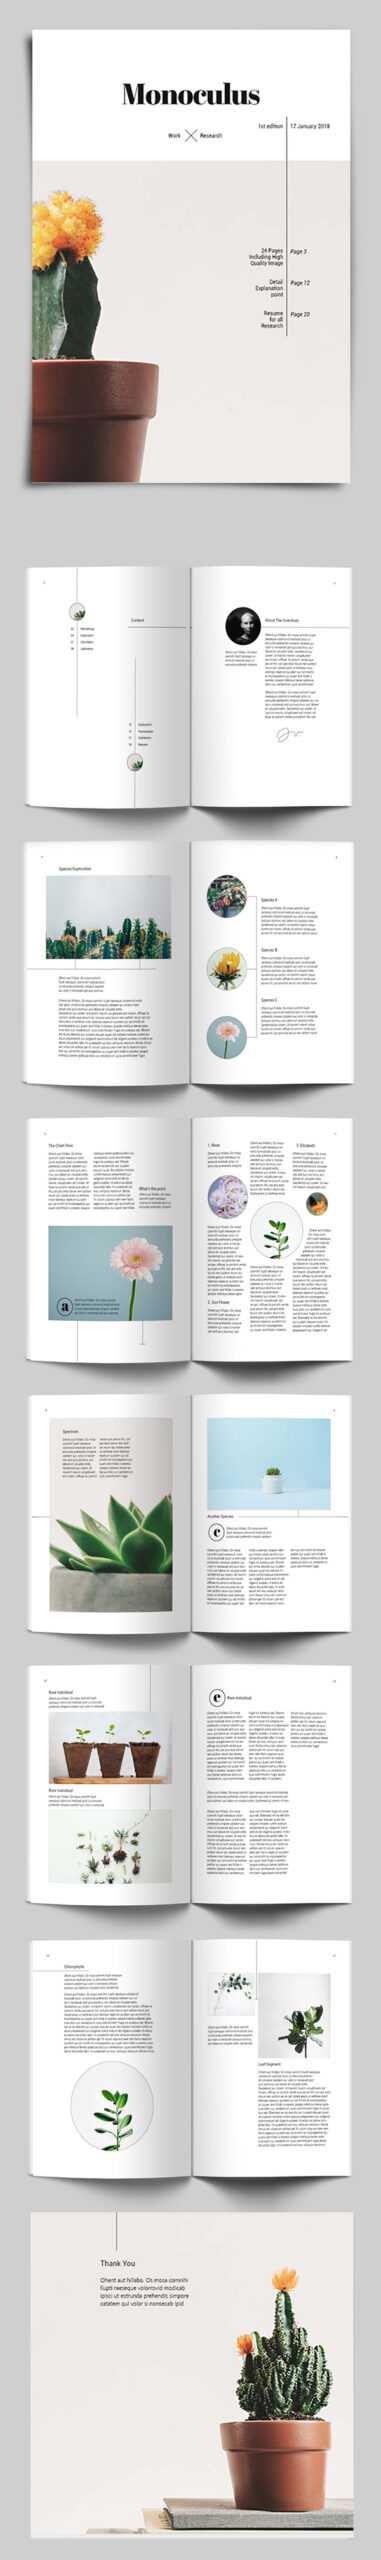 100 Professional Corporate Brochure Templates | Design Within 12 Page Brochure Template